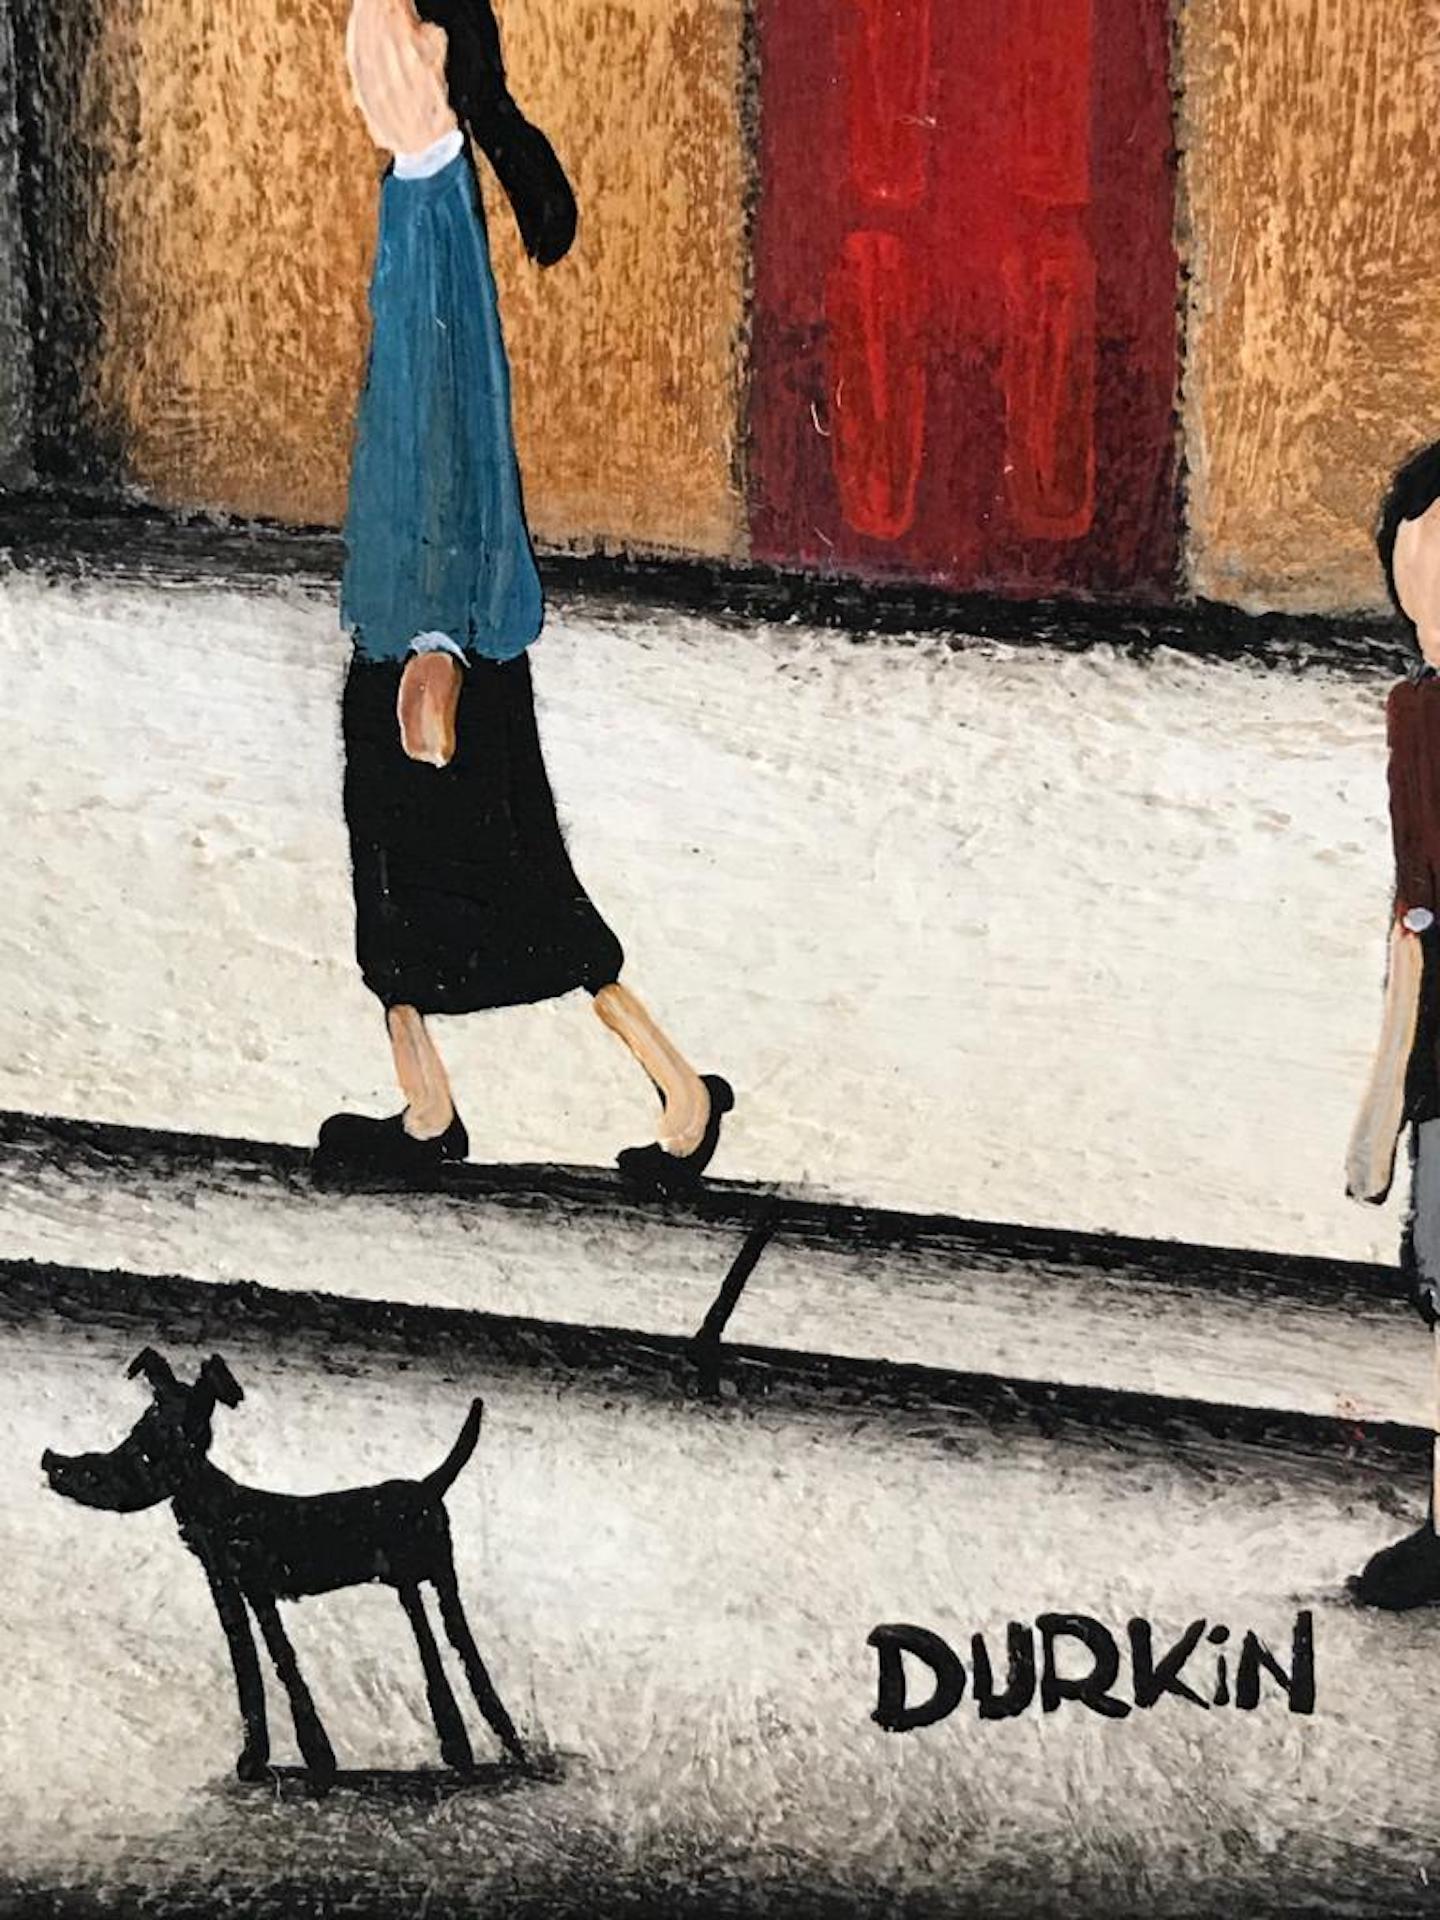 Sean Durkin, Village Life, Contemporary Painting in the Style of Lowry 4